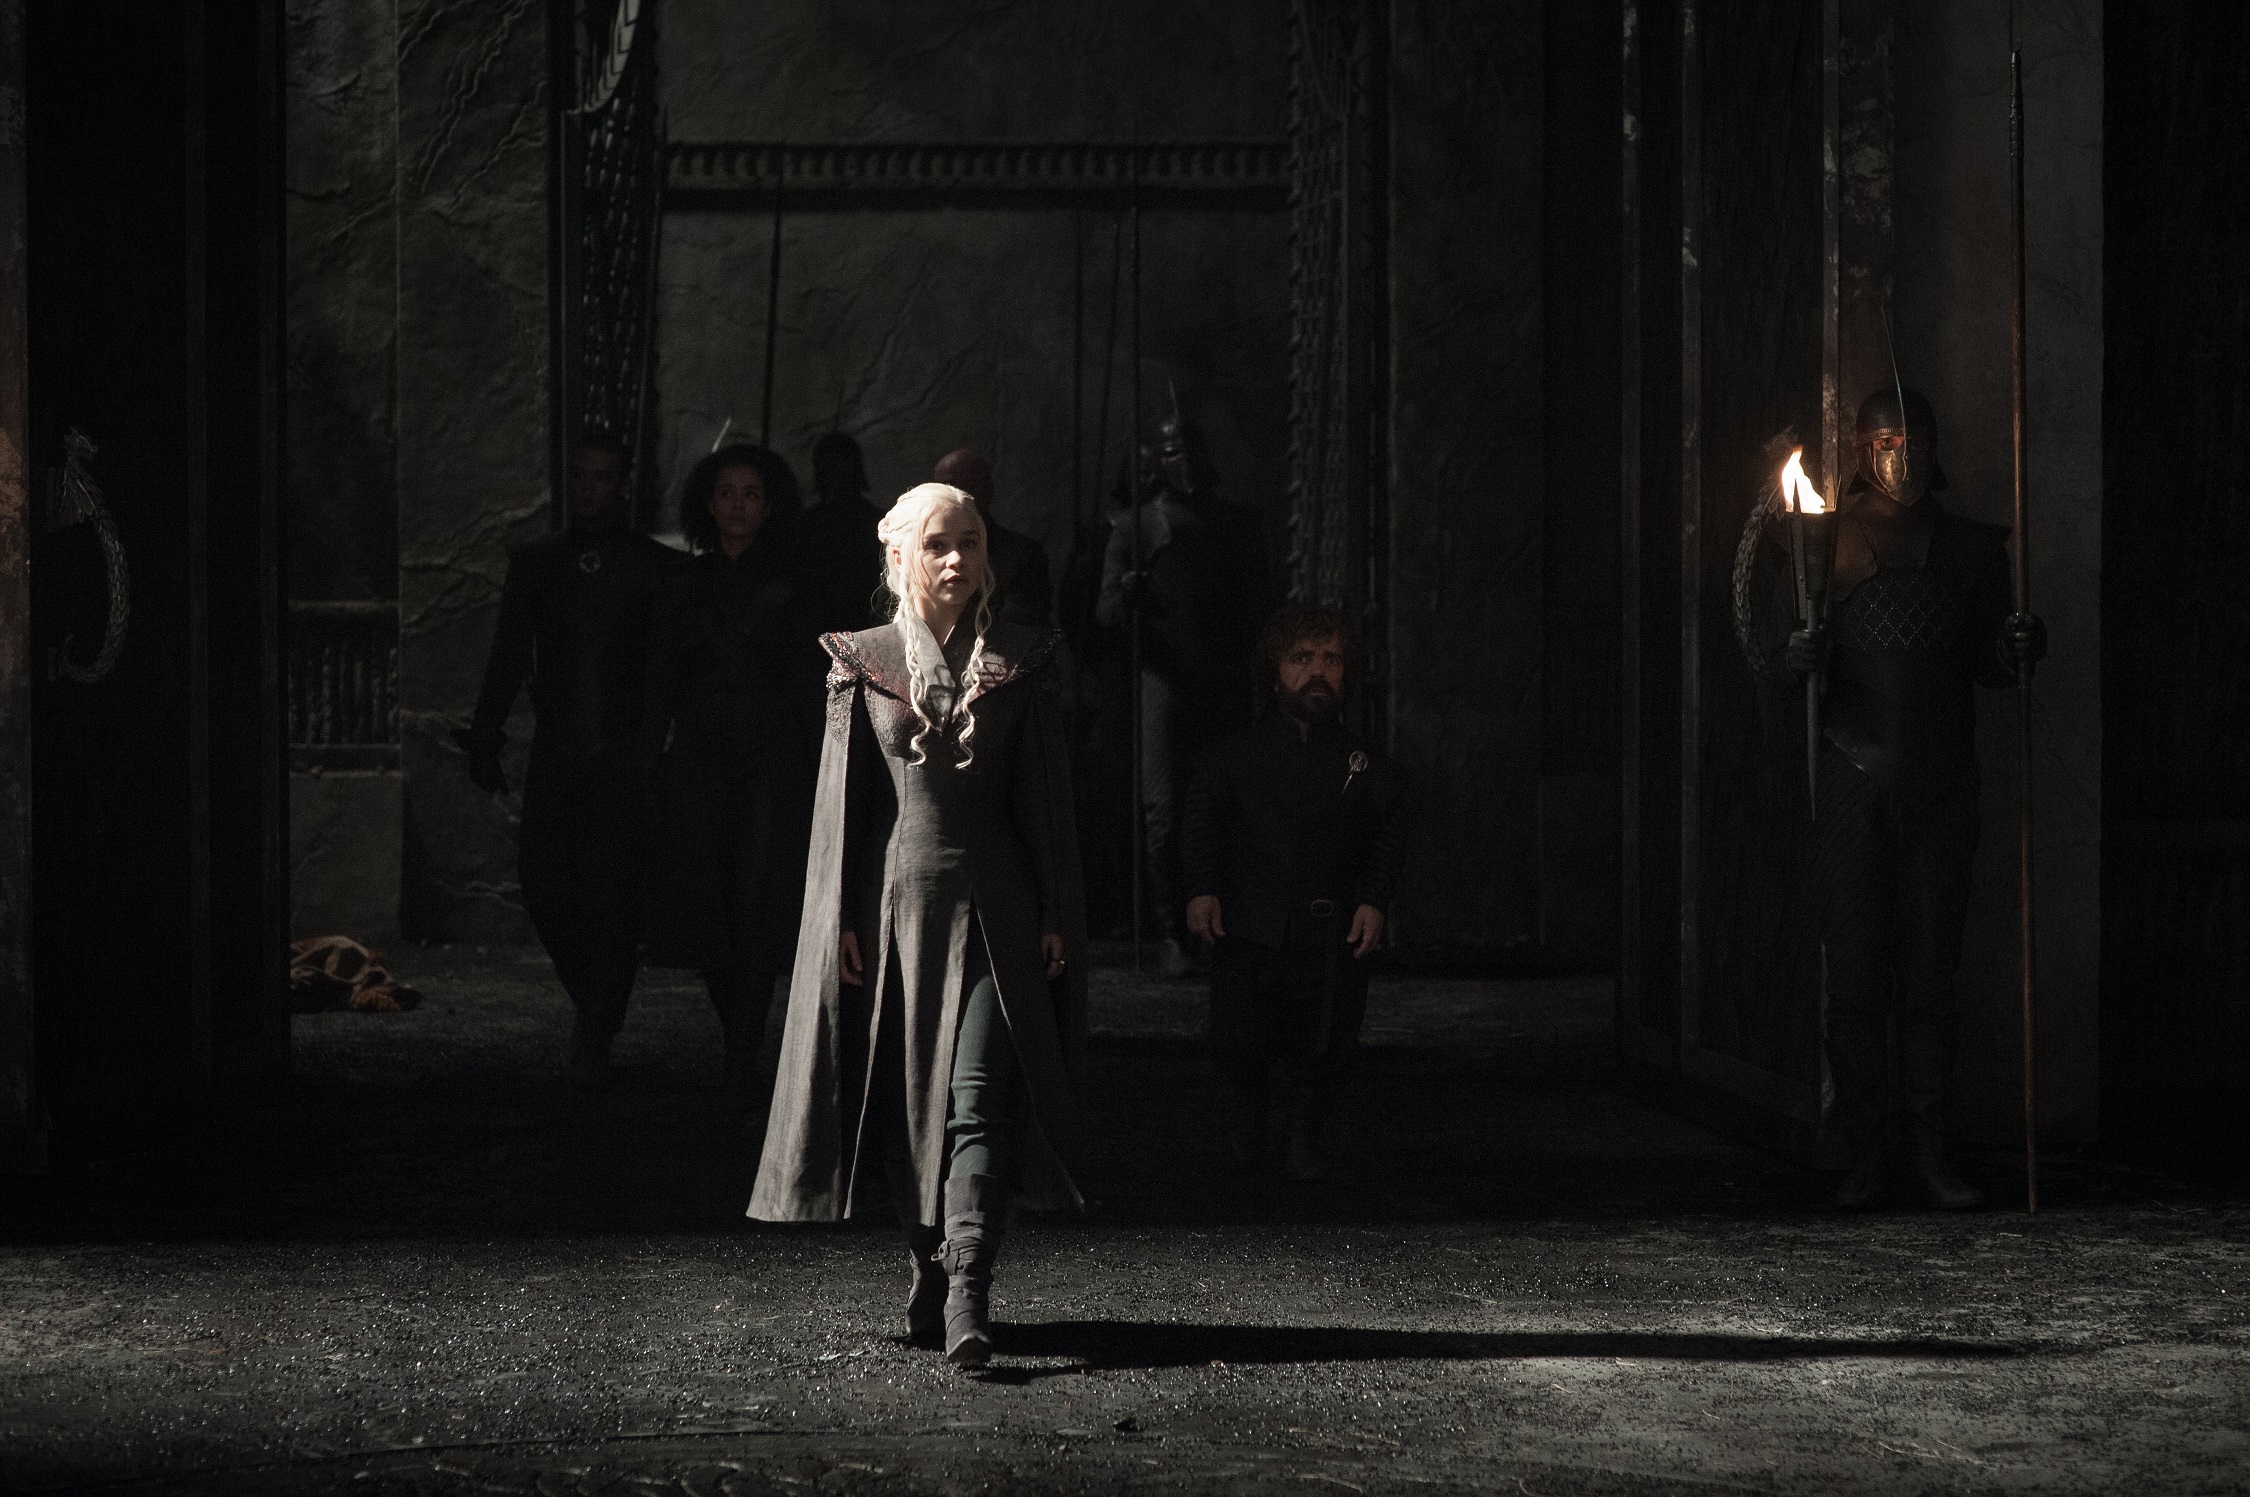 Emilia Clarke as Daenerys Targaryen, Peter Dinklage as Tyrion Lannister, Nathalie Emmanuel as Missandei, Jacob Anderson as Grey Worm and Conleth Hill as Missandei enter the new Targaryen stronghold. Photo: HBO